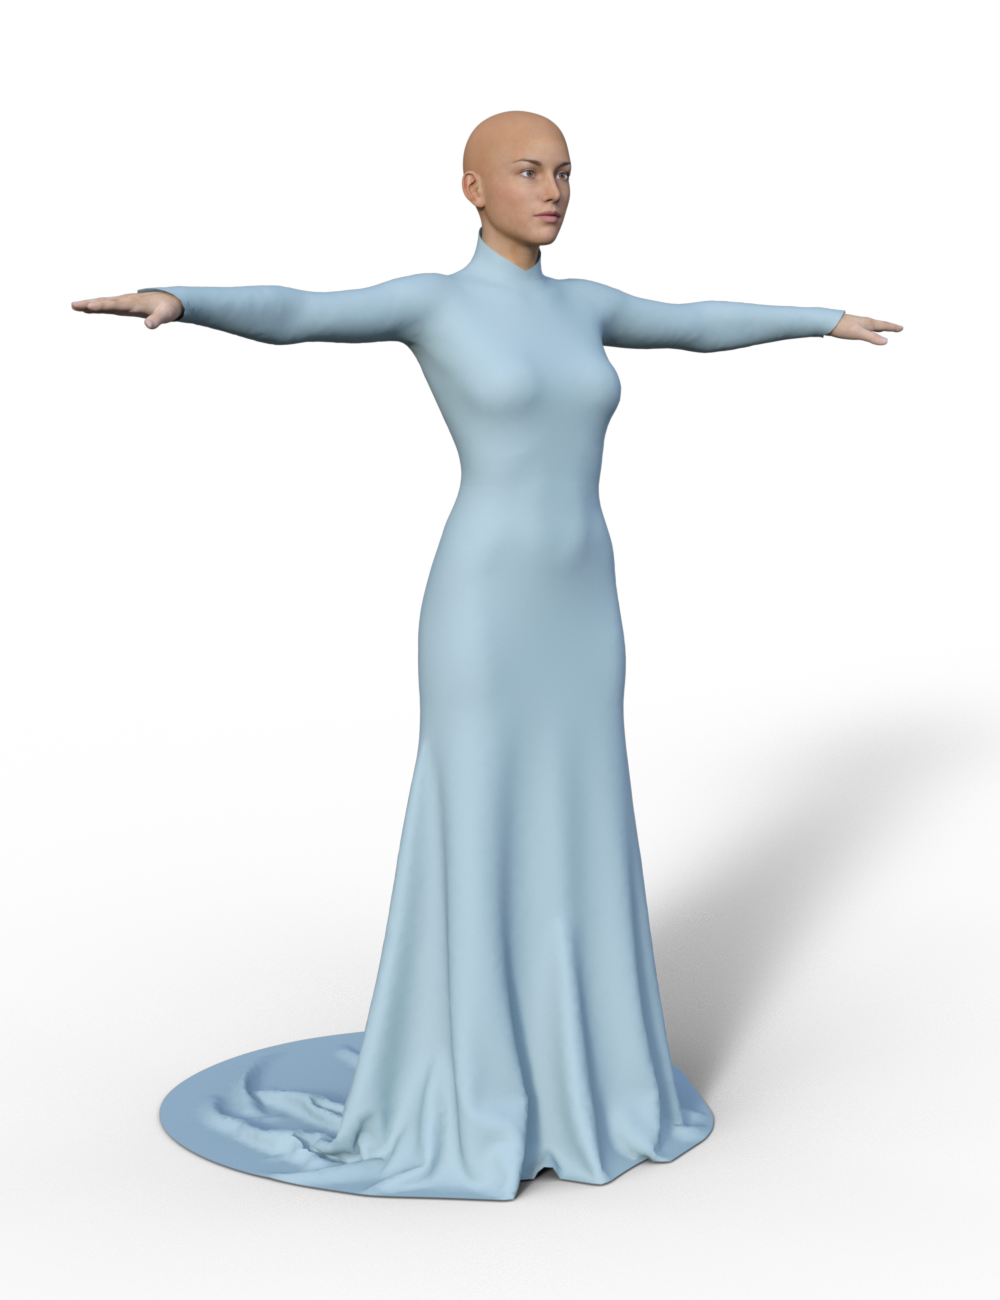 G3F and Trumpet Dress in default T-Pose